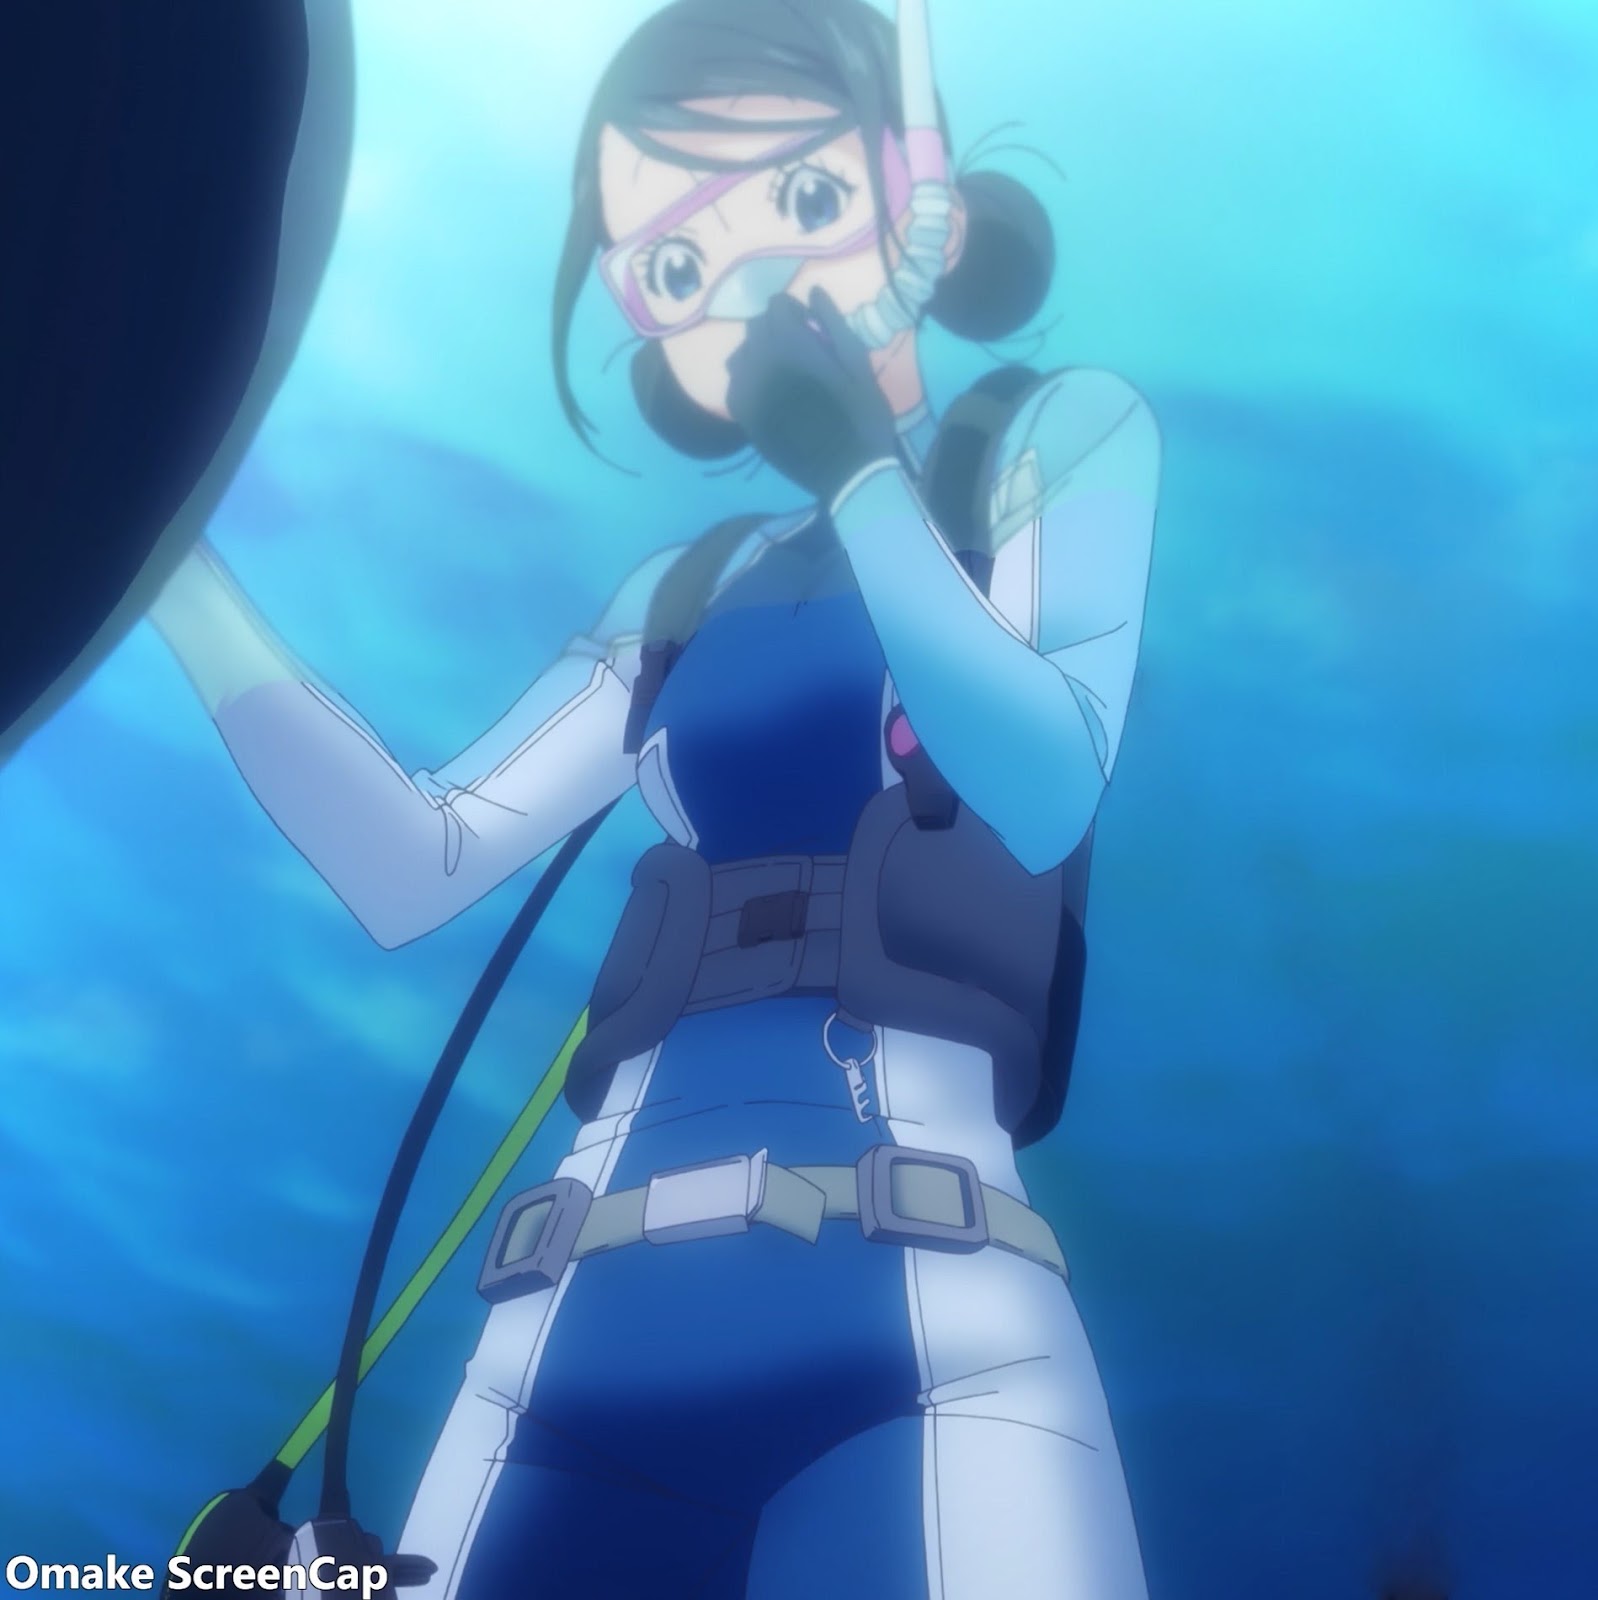 Joeschmo's Gears and Grounds: 10 Second Anime - Amanchu! - Episode 12 [END]